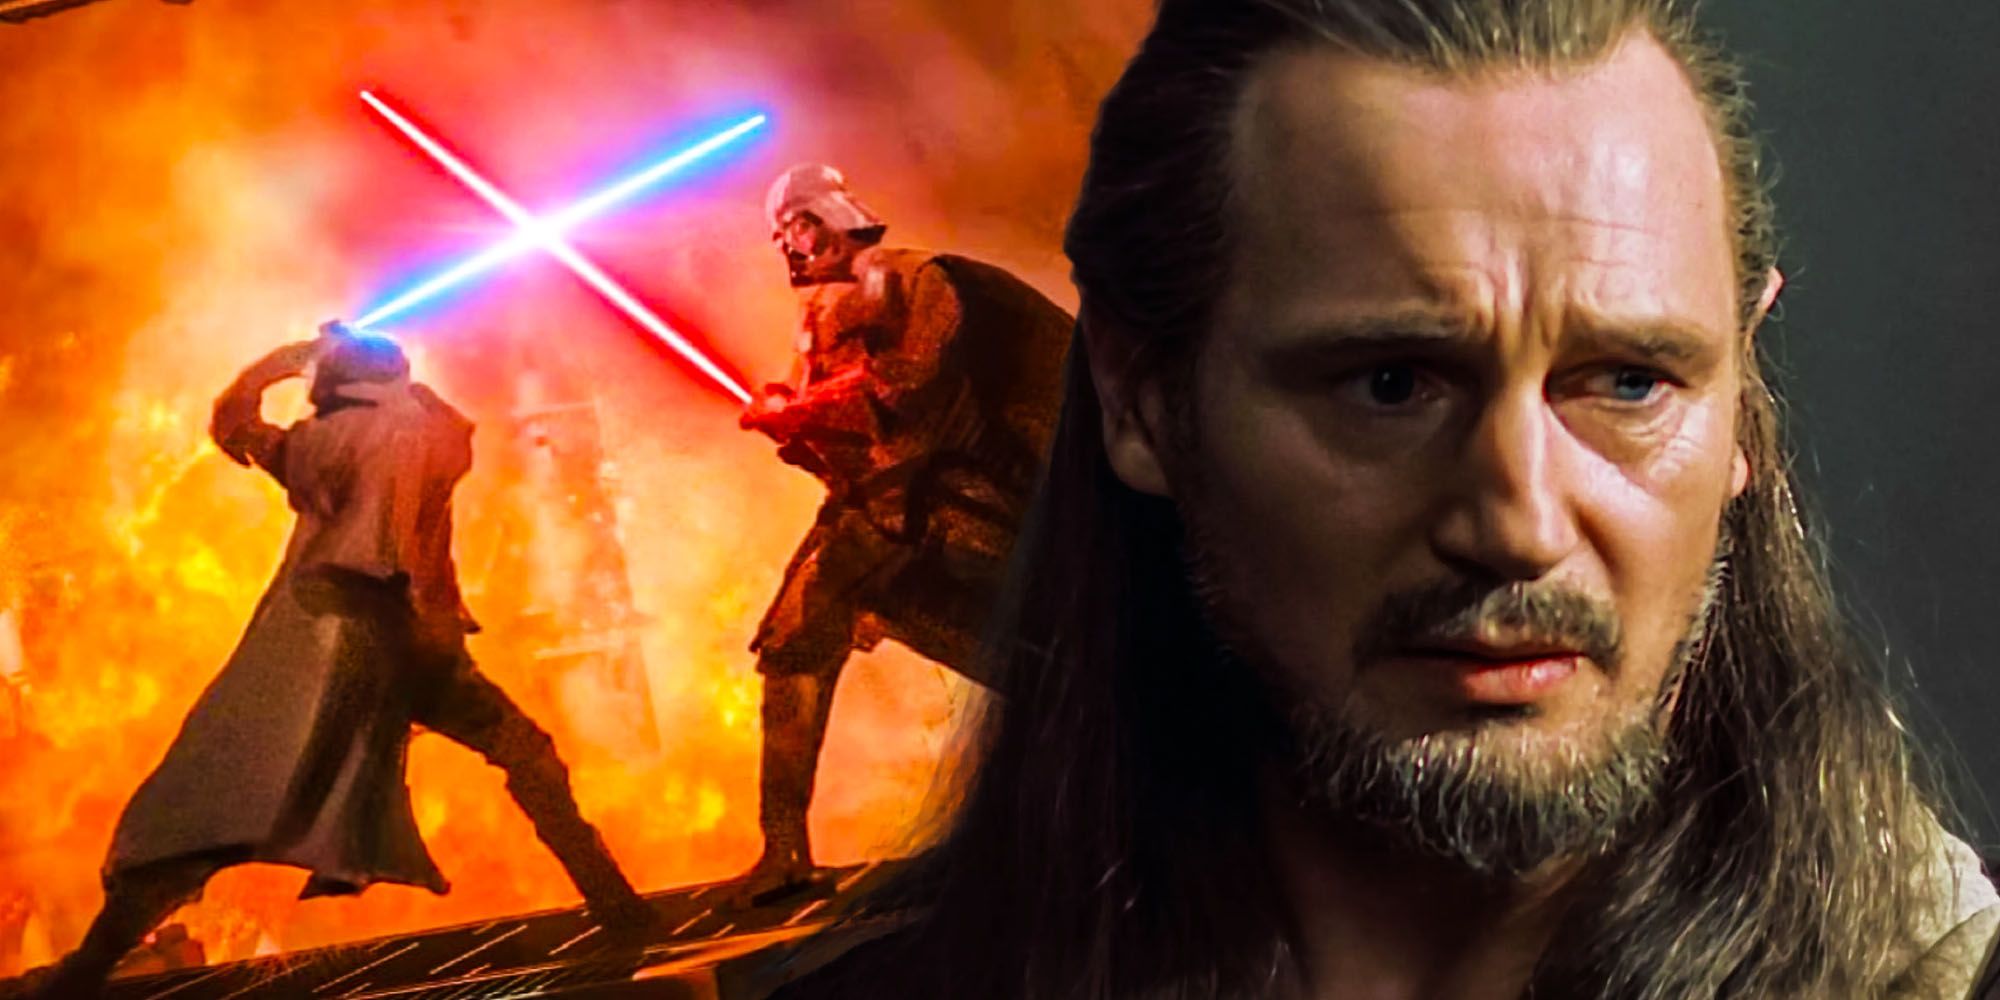 Everyone wants more Kenobi, but I'd honestly kill for even one more scene  with Jedi Master Qui Gon Jinn : r/StarWars